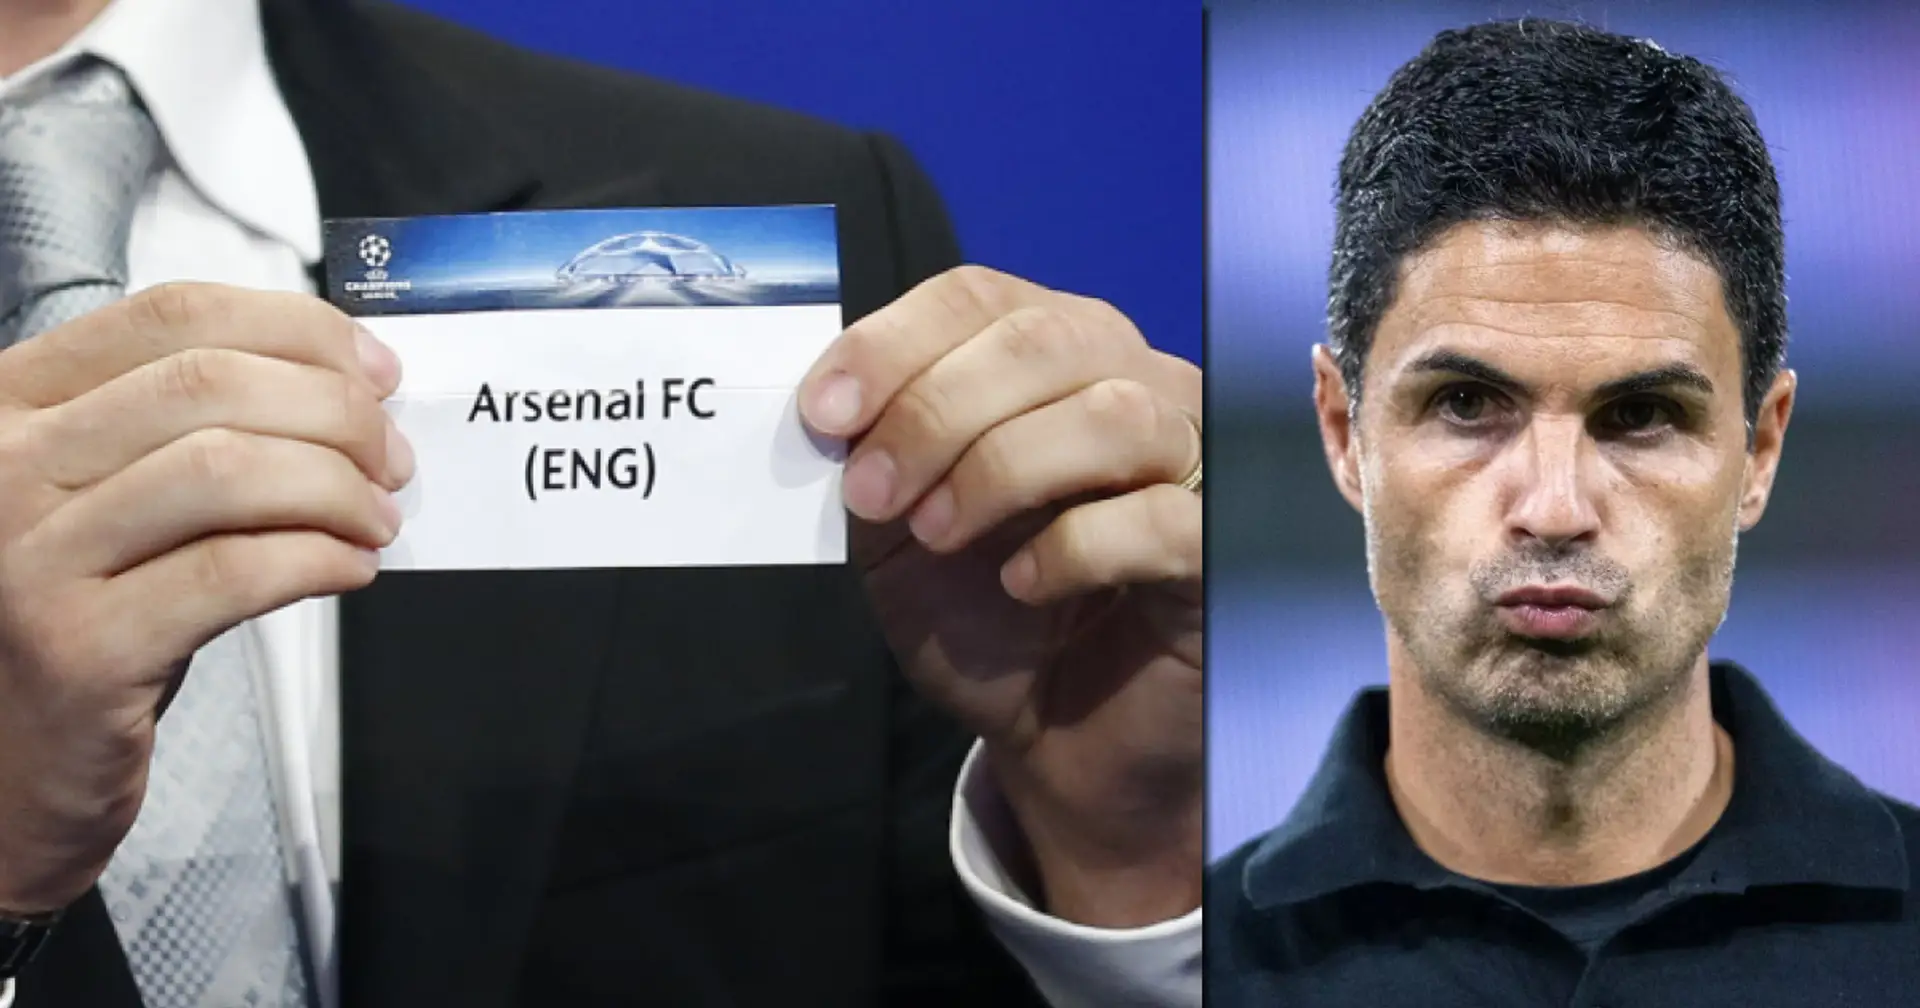 When will Arsenal find out their Champions League opponents? Answered